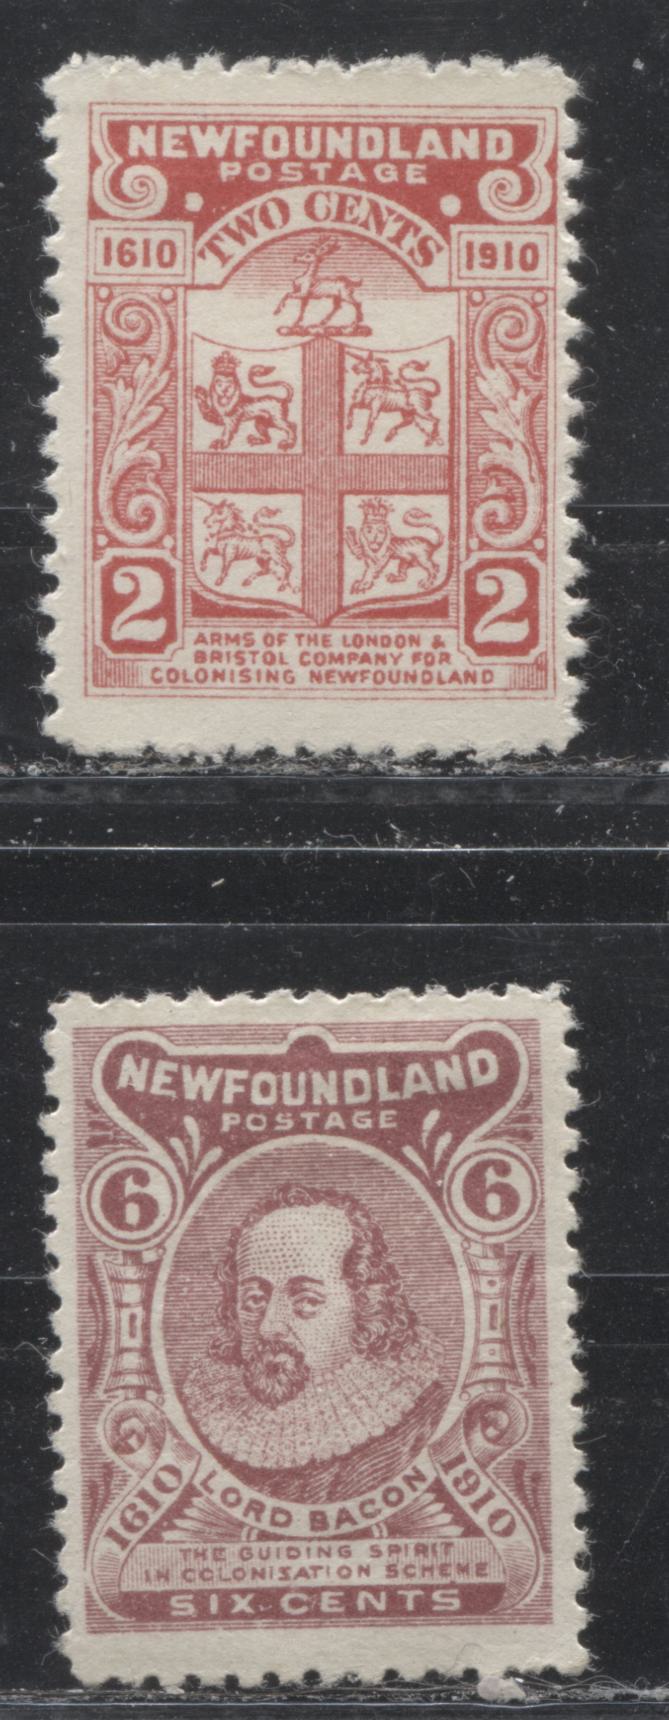 Lot 7 Newfoundland # 88, 92 2c & 6c Rose Red & Claret London & Bristol Co. and Lord Bacon, 1910 John Guy Issue, A Fine OG Example, Perf. 12, Type 1 With Reversed Z